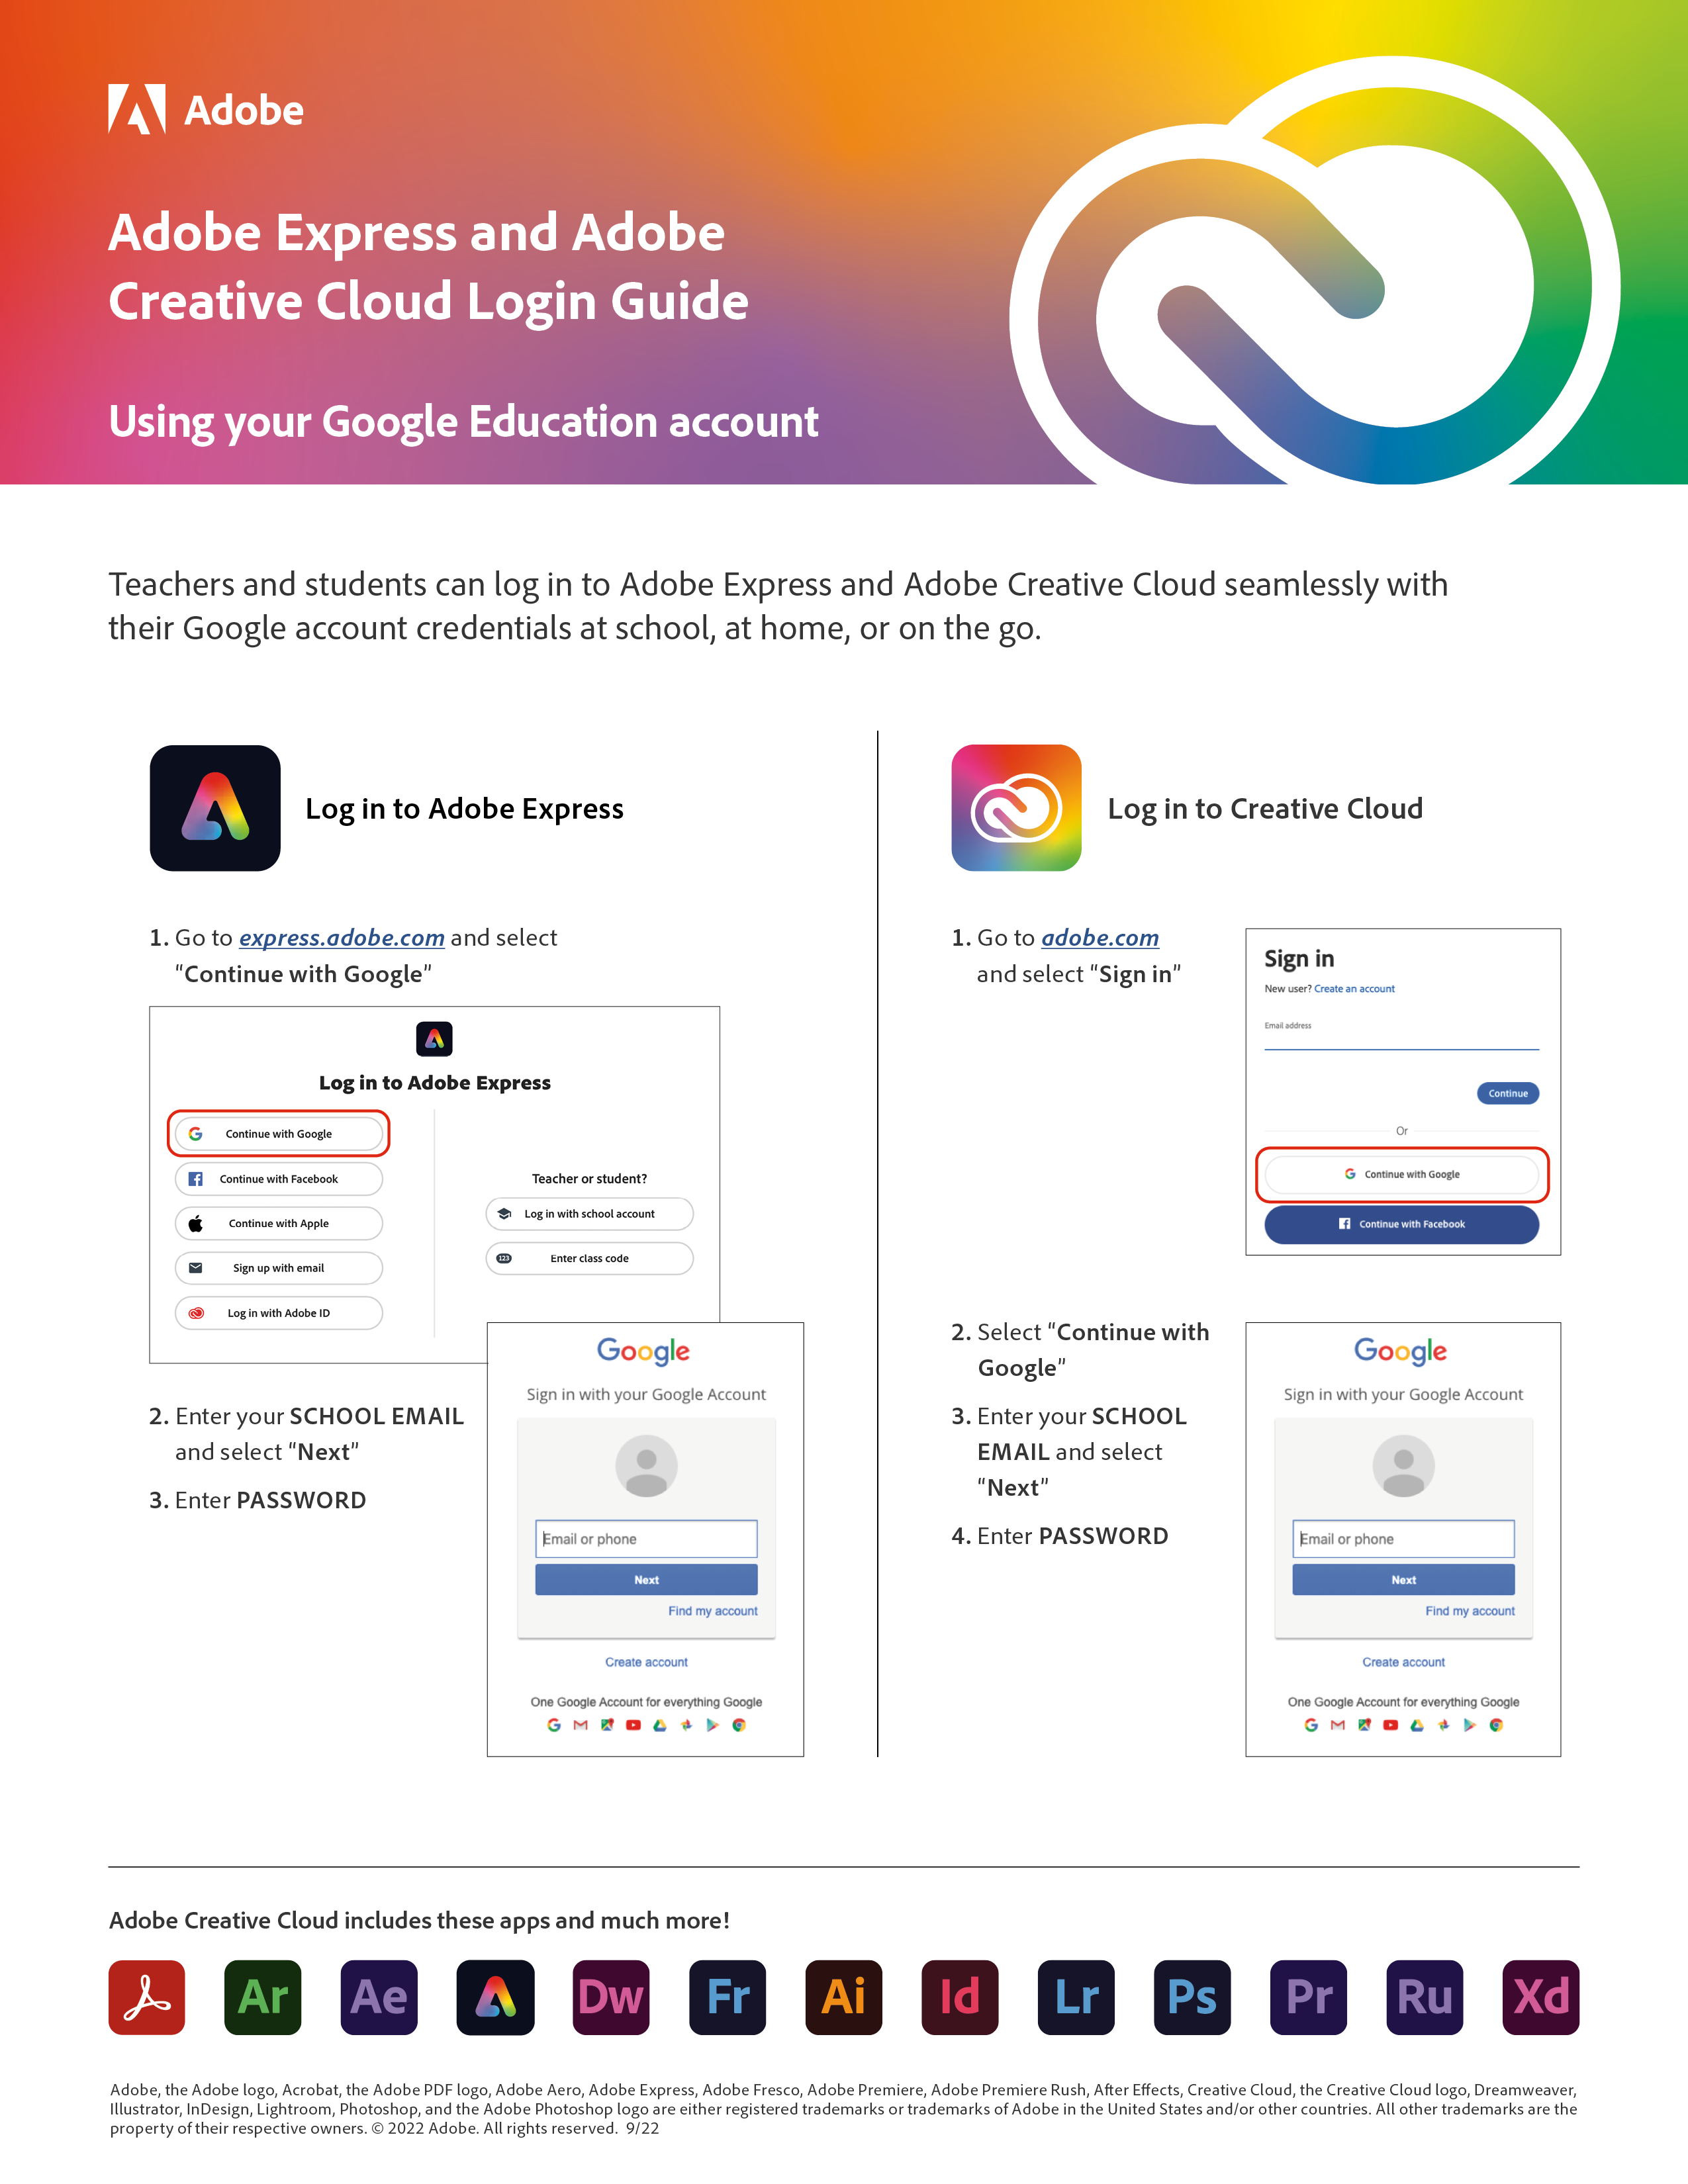 Log in to Adobe Express and Adobe Creative Cloud with Google